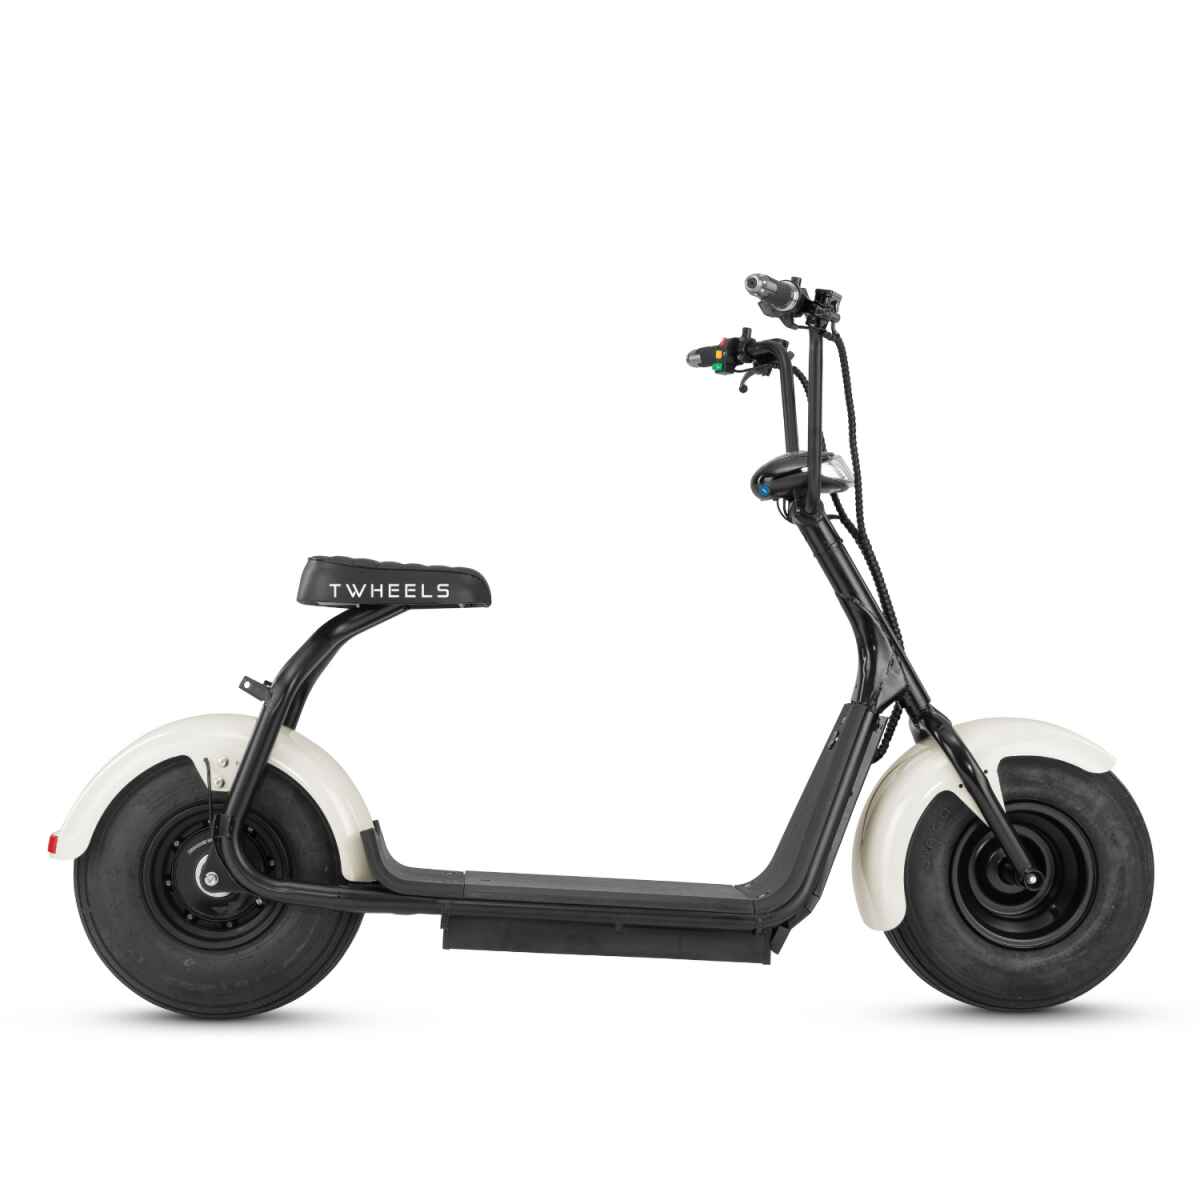 Harley style electric scooter in white